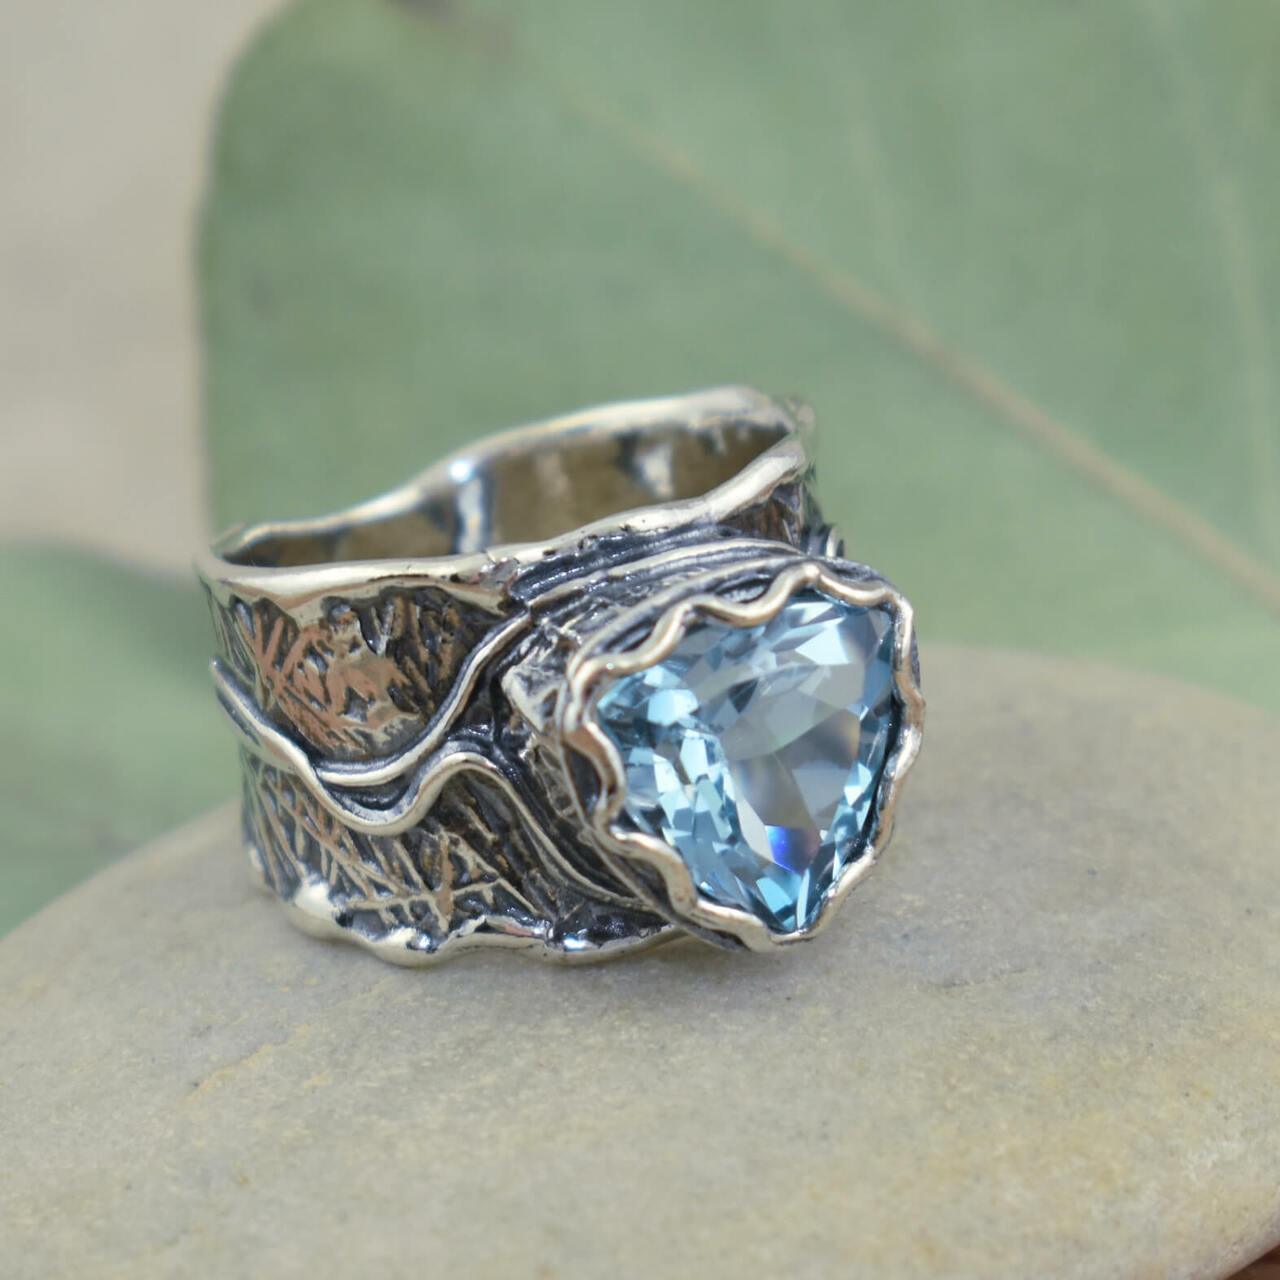 .925 sterling silver ring with light blue stone